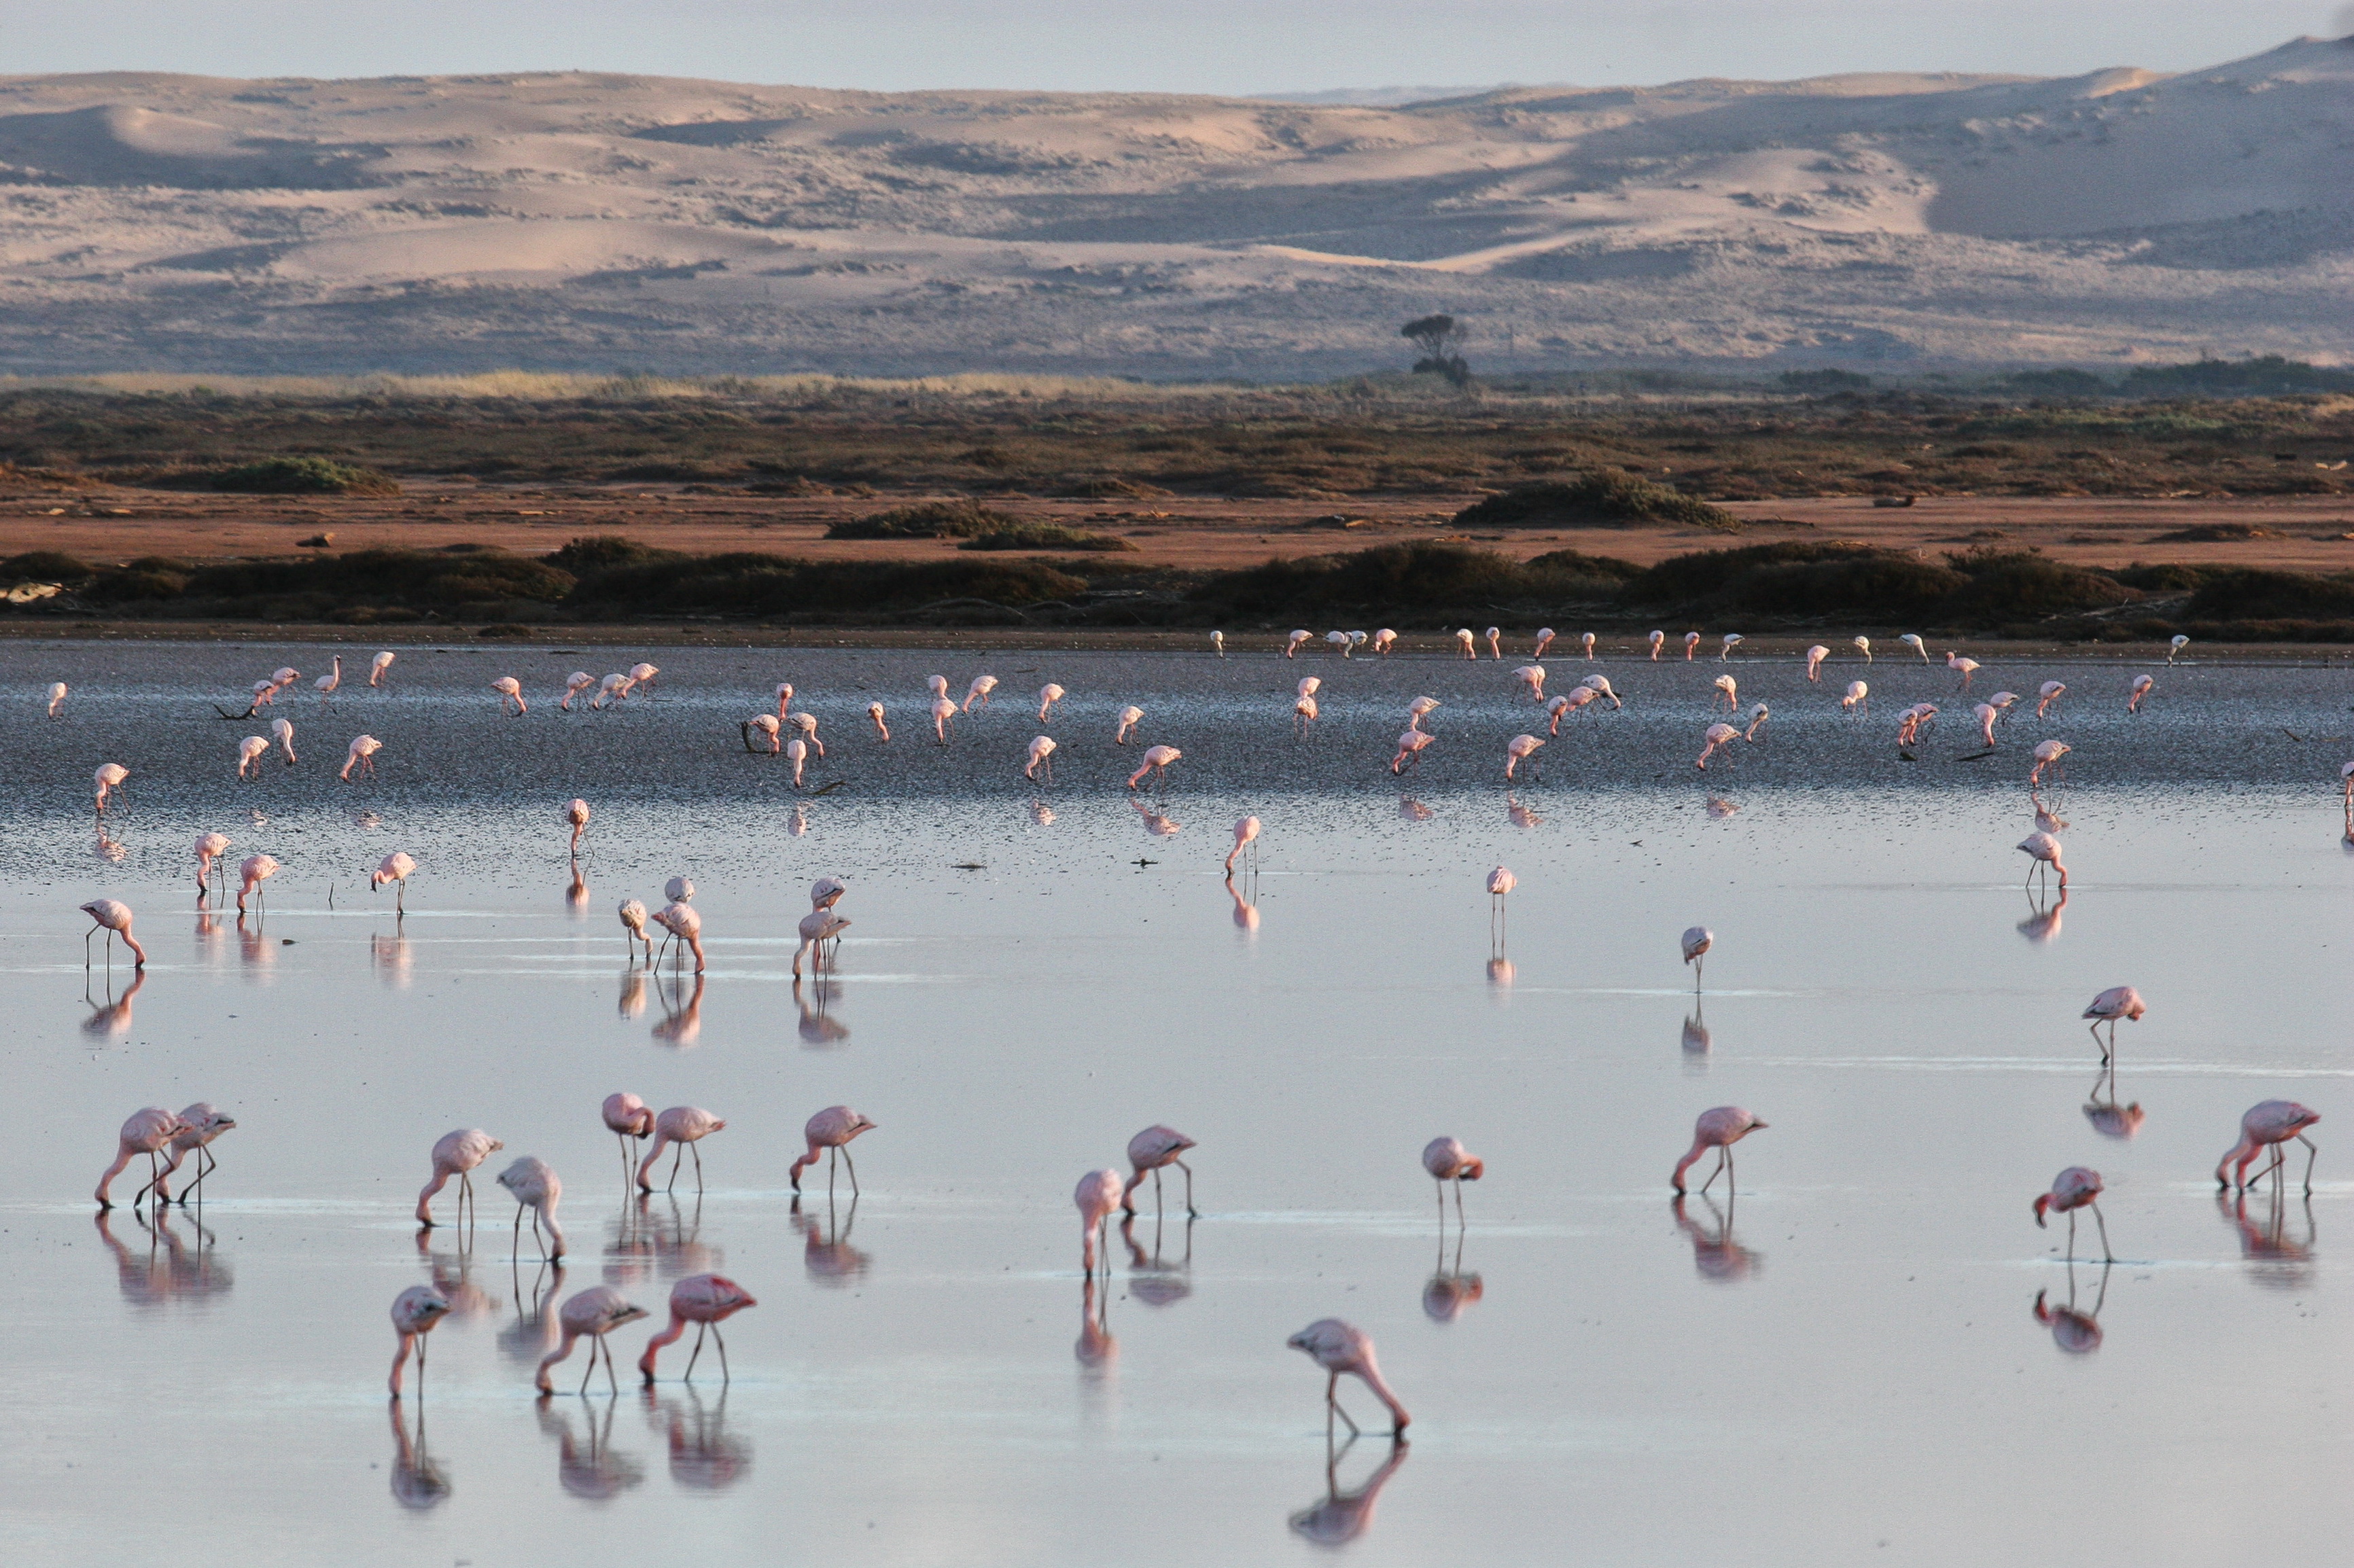 Flamingos at the mouth of the Orange River, with Namibia across the waters.